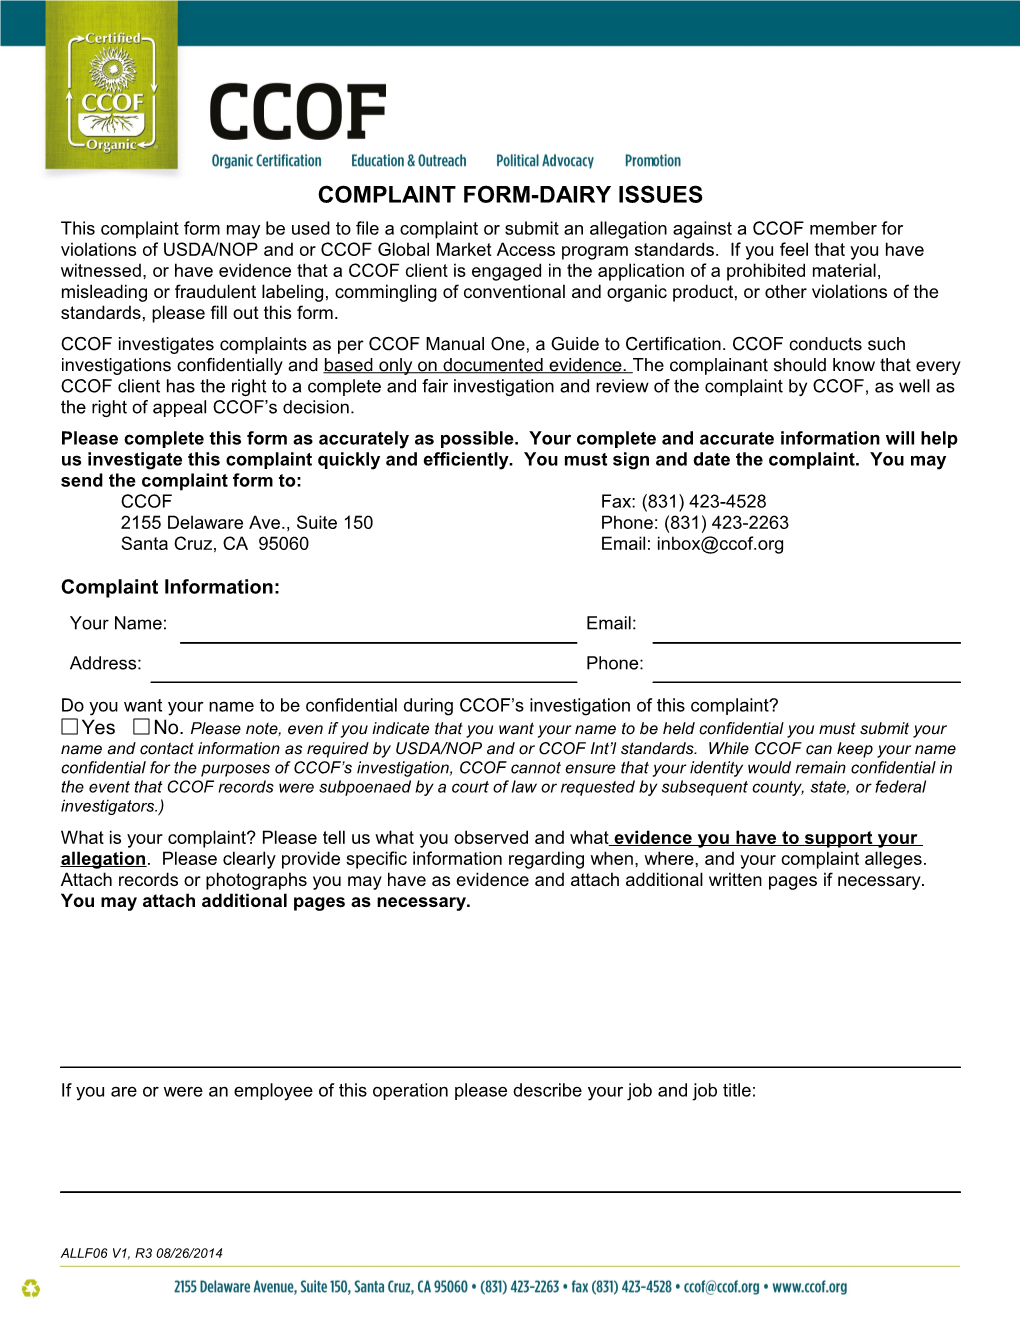 Complaint Form-Dairy Issues